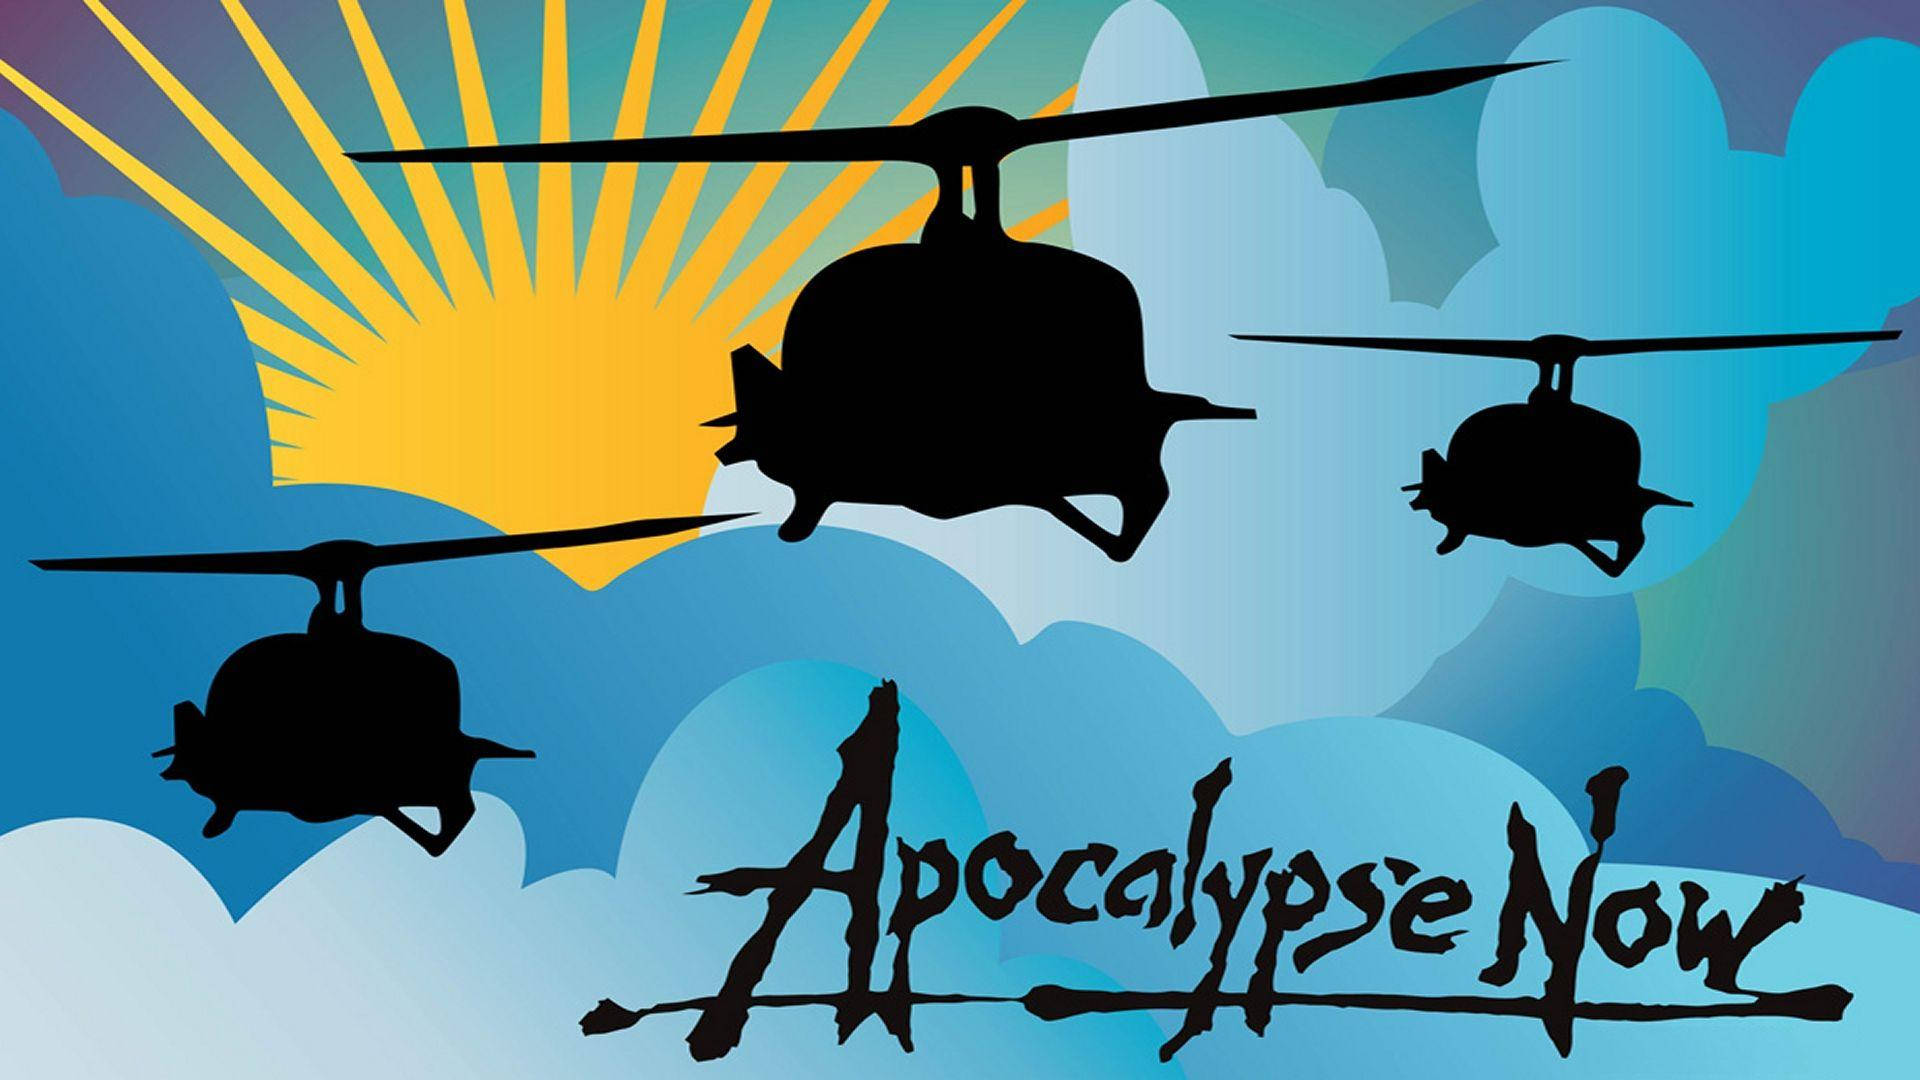 Apocalypse Now Flying Helicopter Silhouette Wallpaper